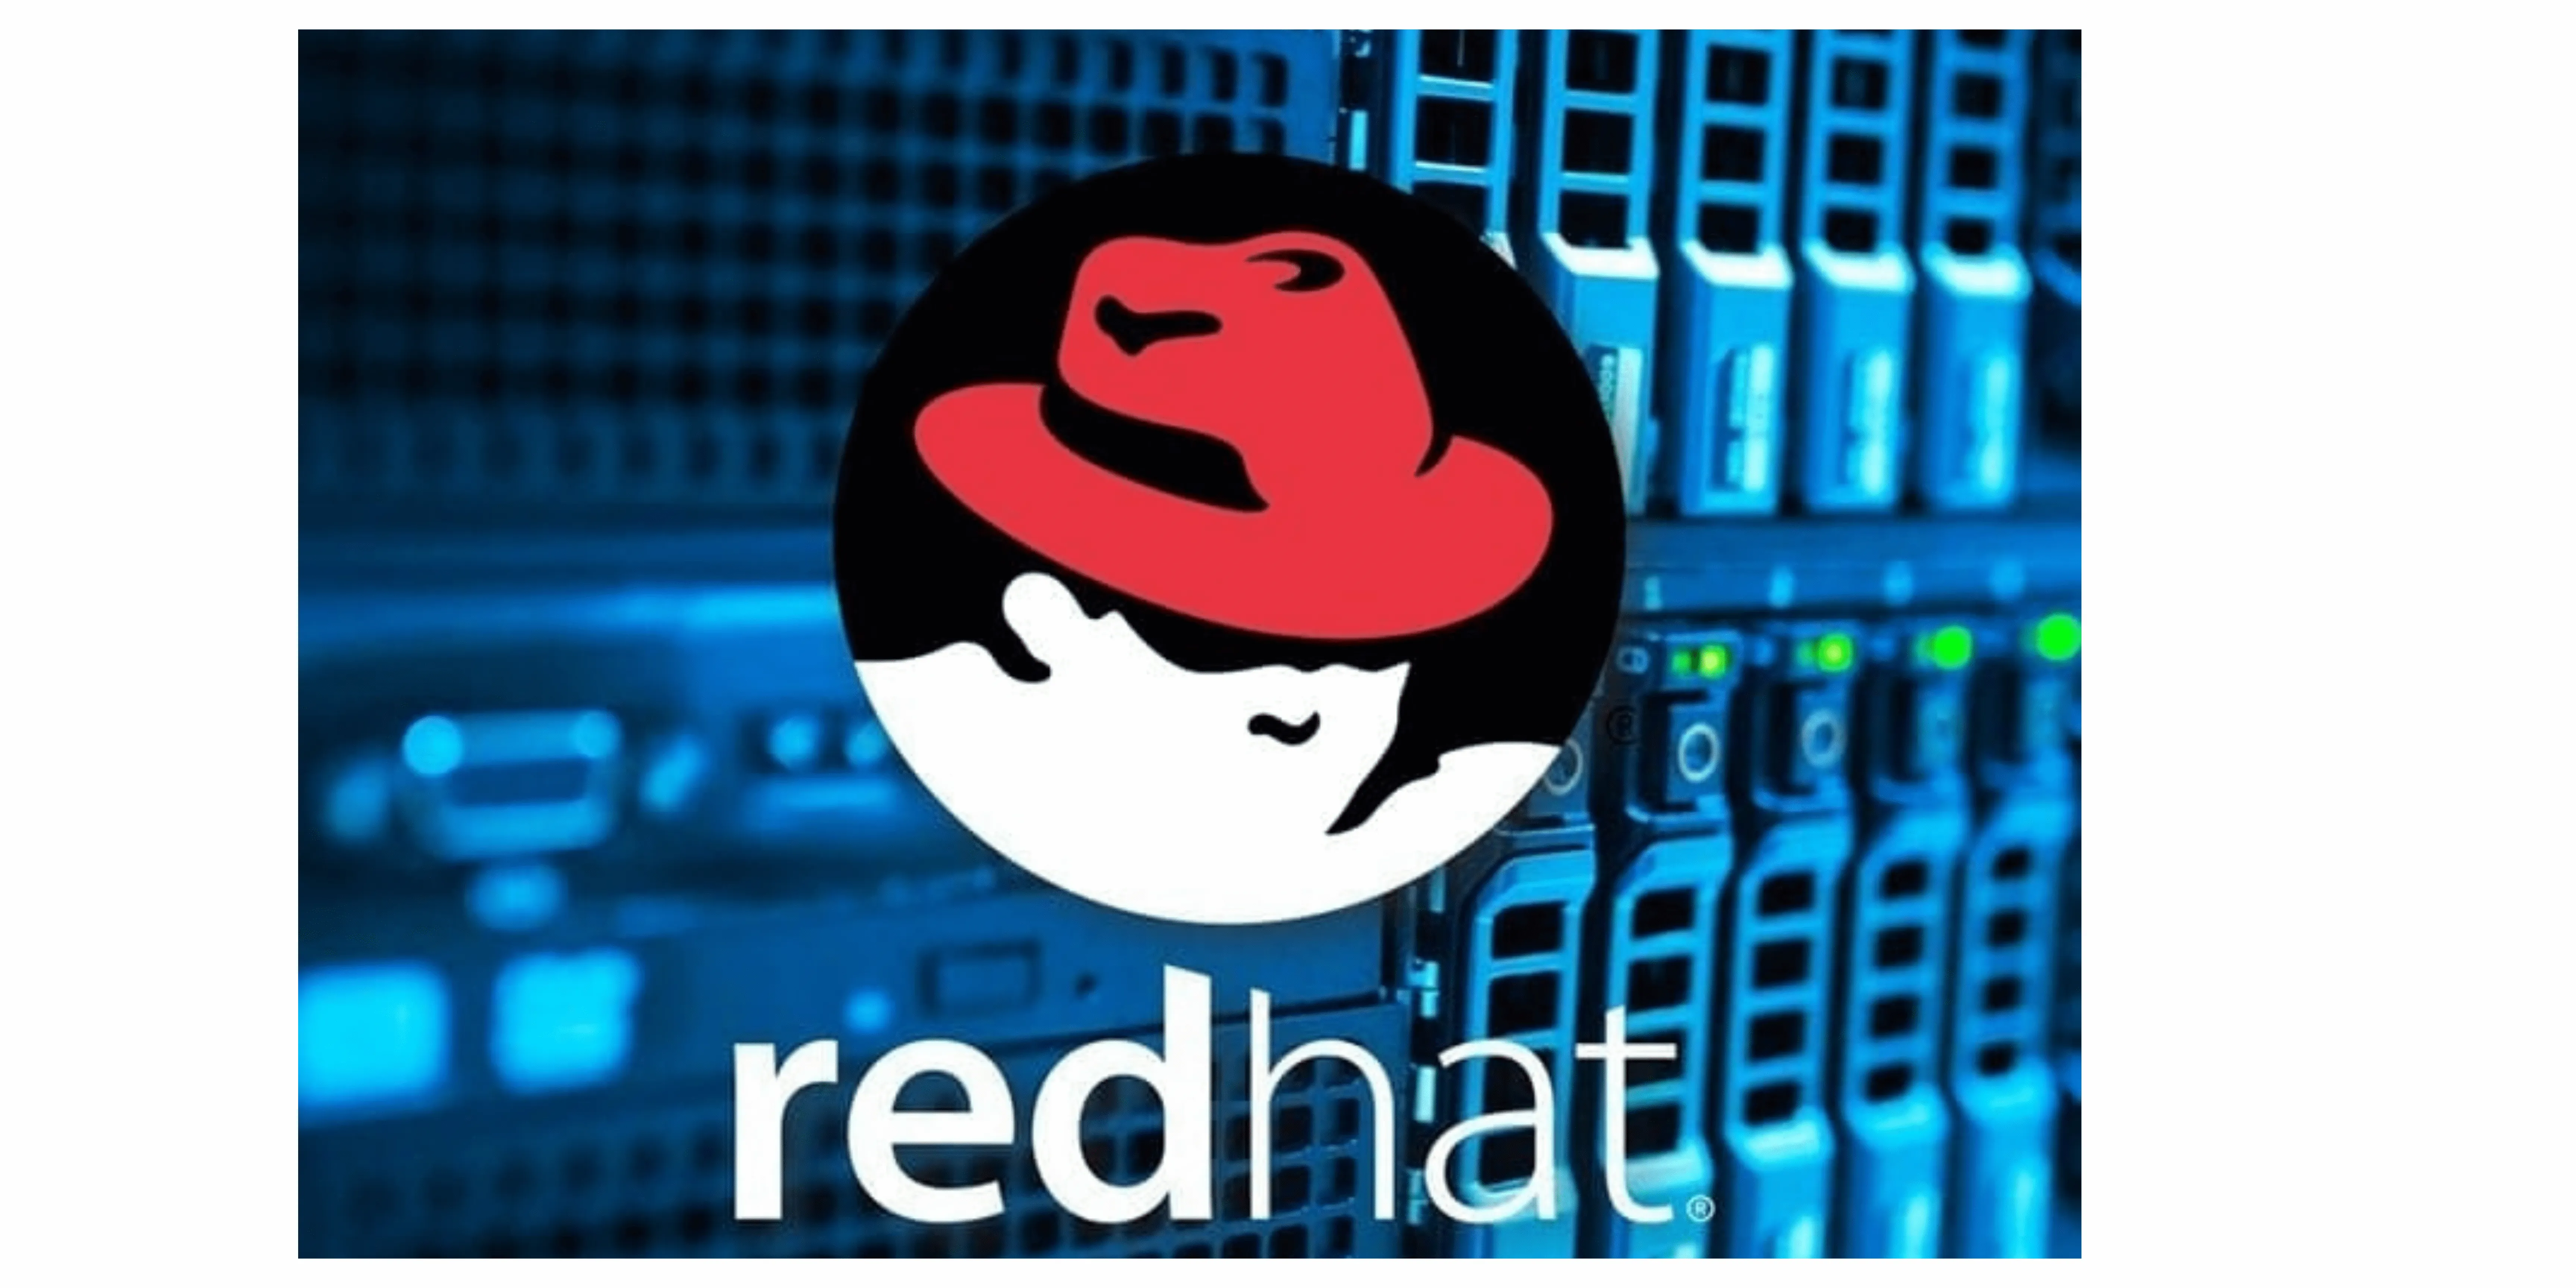 Future of red hat admins in the business world. 